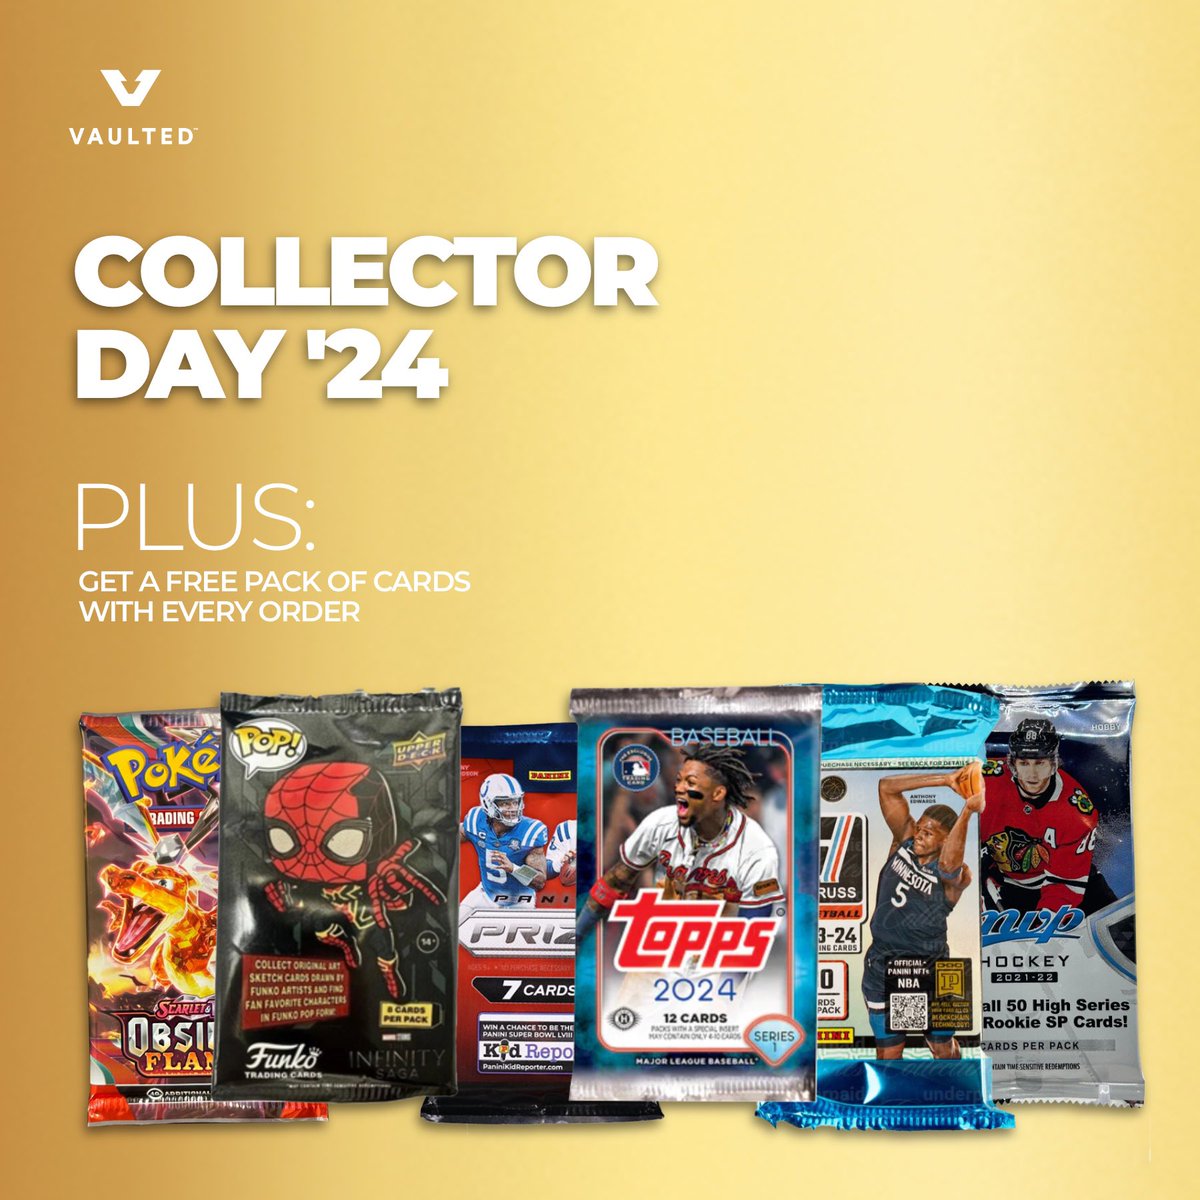 Calling all Collectors! Vaulted Collector Day 2024 is here. As a token of our thanks, today you get 20% off site-wide, plus a free factory-sealed card pack with every purchase. Get in the game now to unlock valuable savings instantly. LET'S GO! 👇